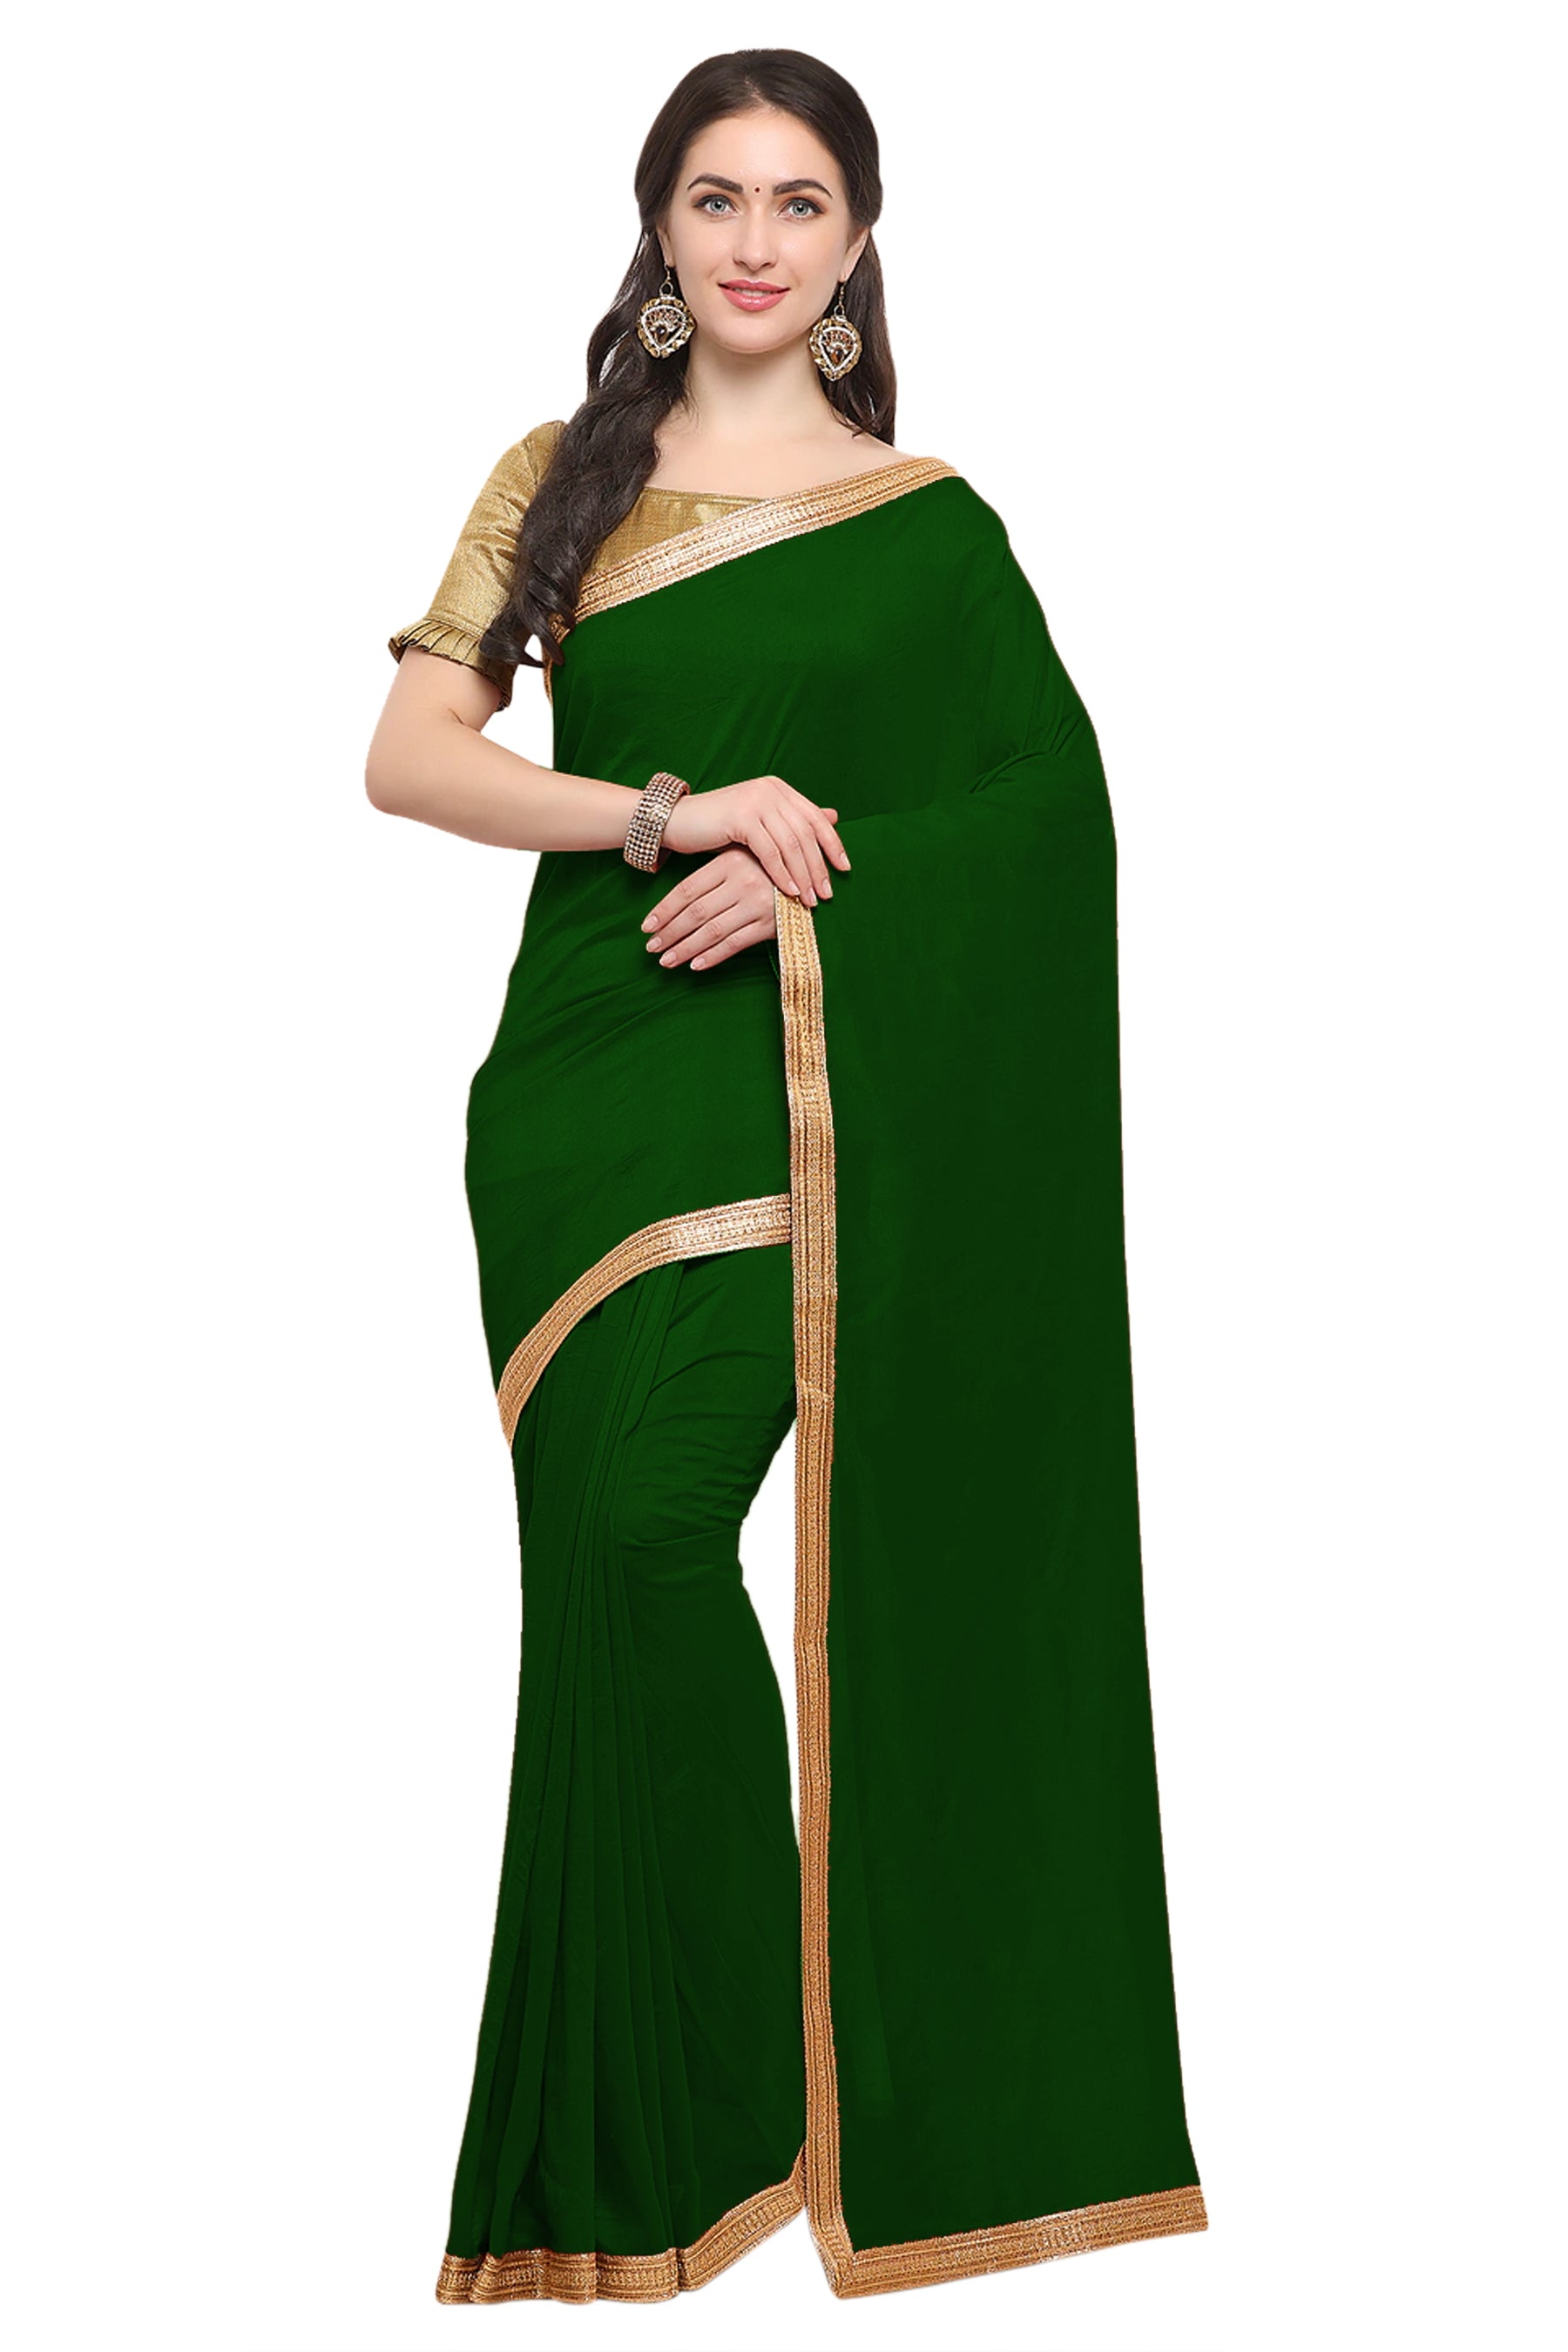 Women's self Woven Solid Occasion Wear Georgette Heavy Border Sari With Blouse Piece (Green) - NIMIDHYA